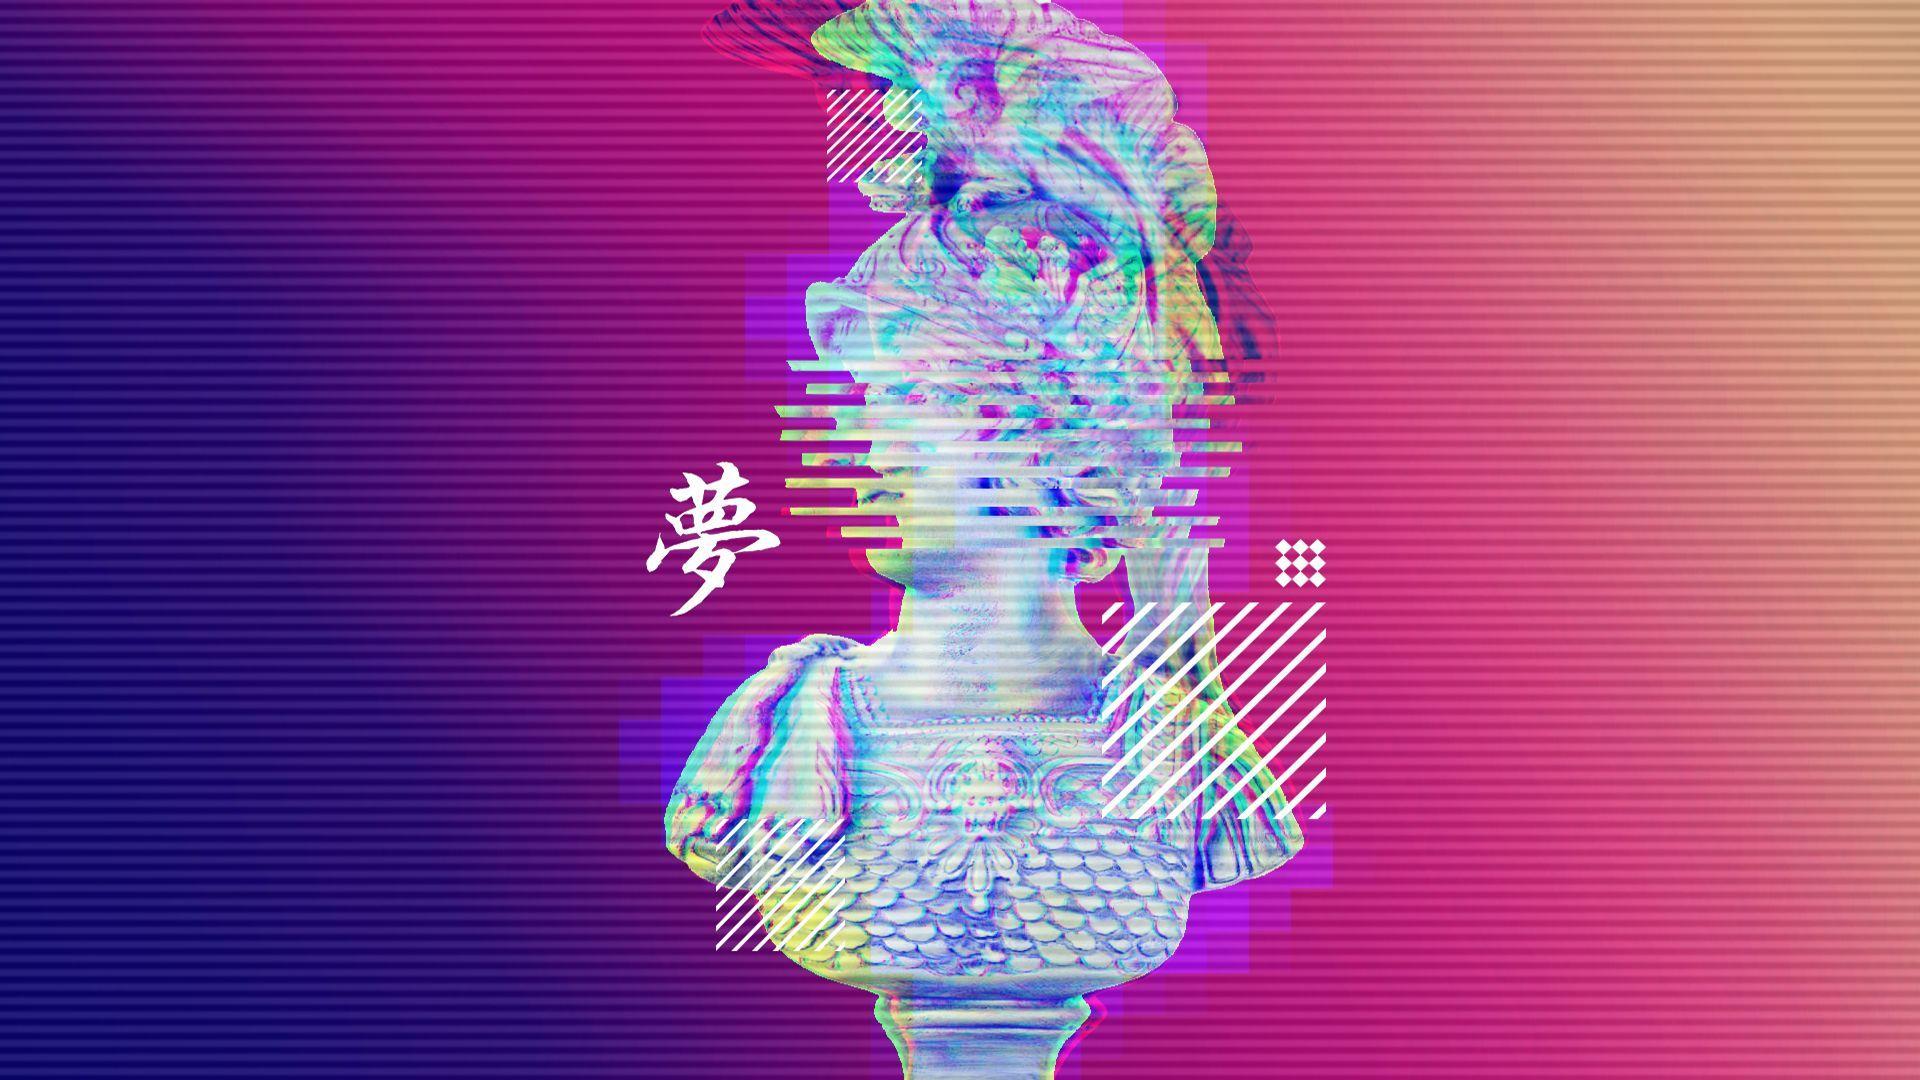 Glitch Vaporwave Wallpapers Top Free Glitch Vaporwave Backgrounds Wallpaperaccess 